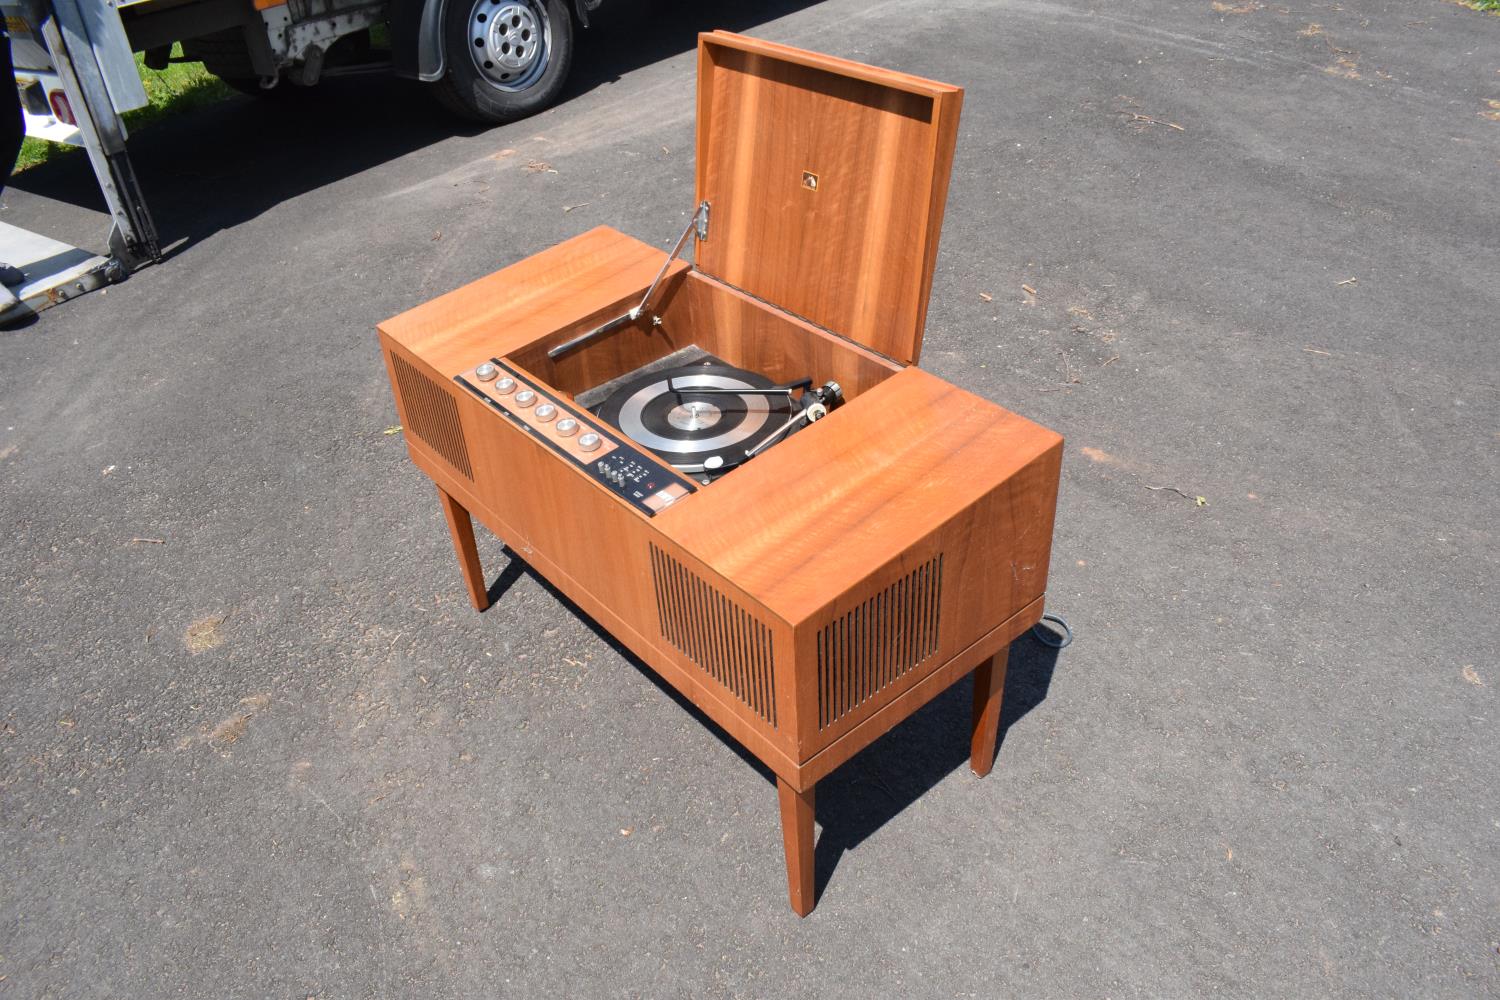 HMV teak radiogram unit. 96 x 44 x 60cm. In good condition with signs of age-related wear and - Image 5 of 6